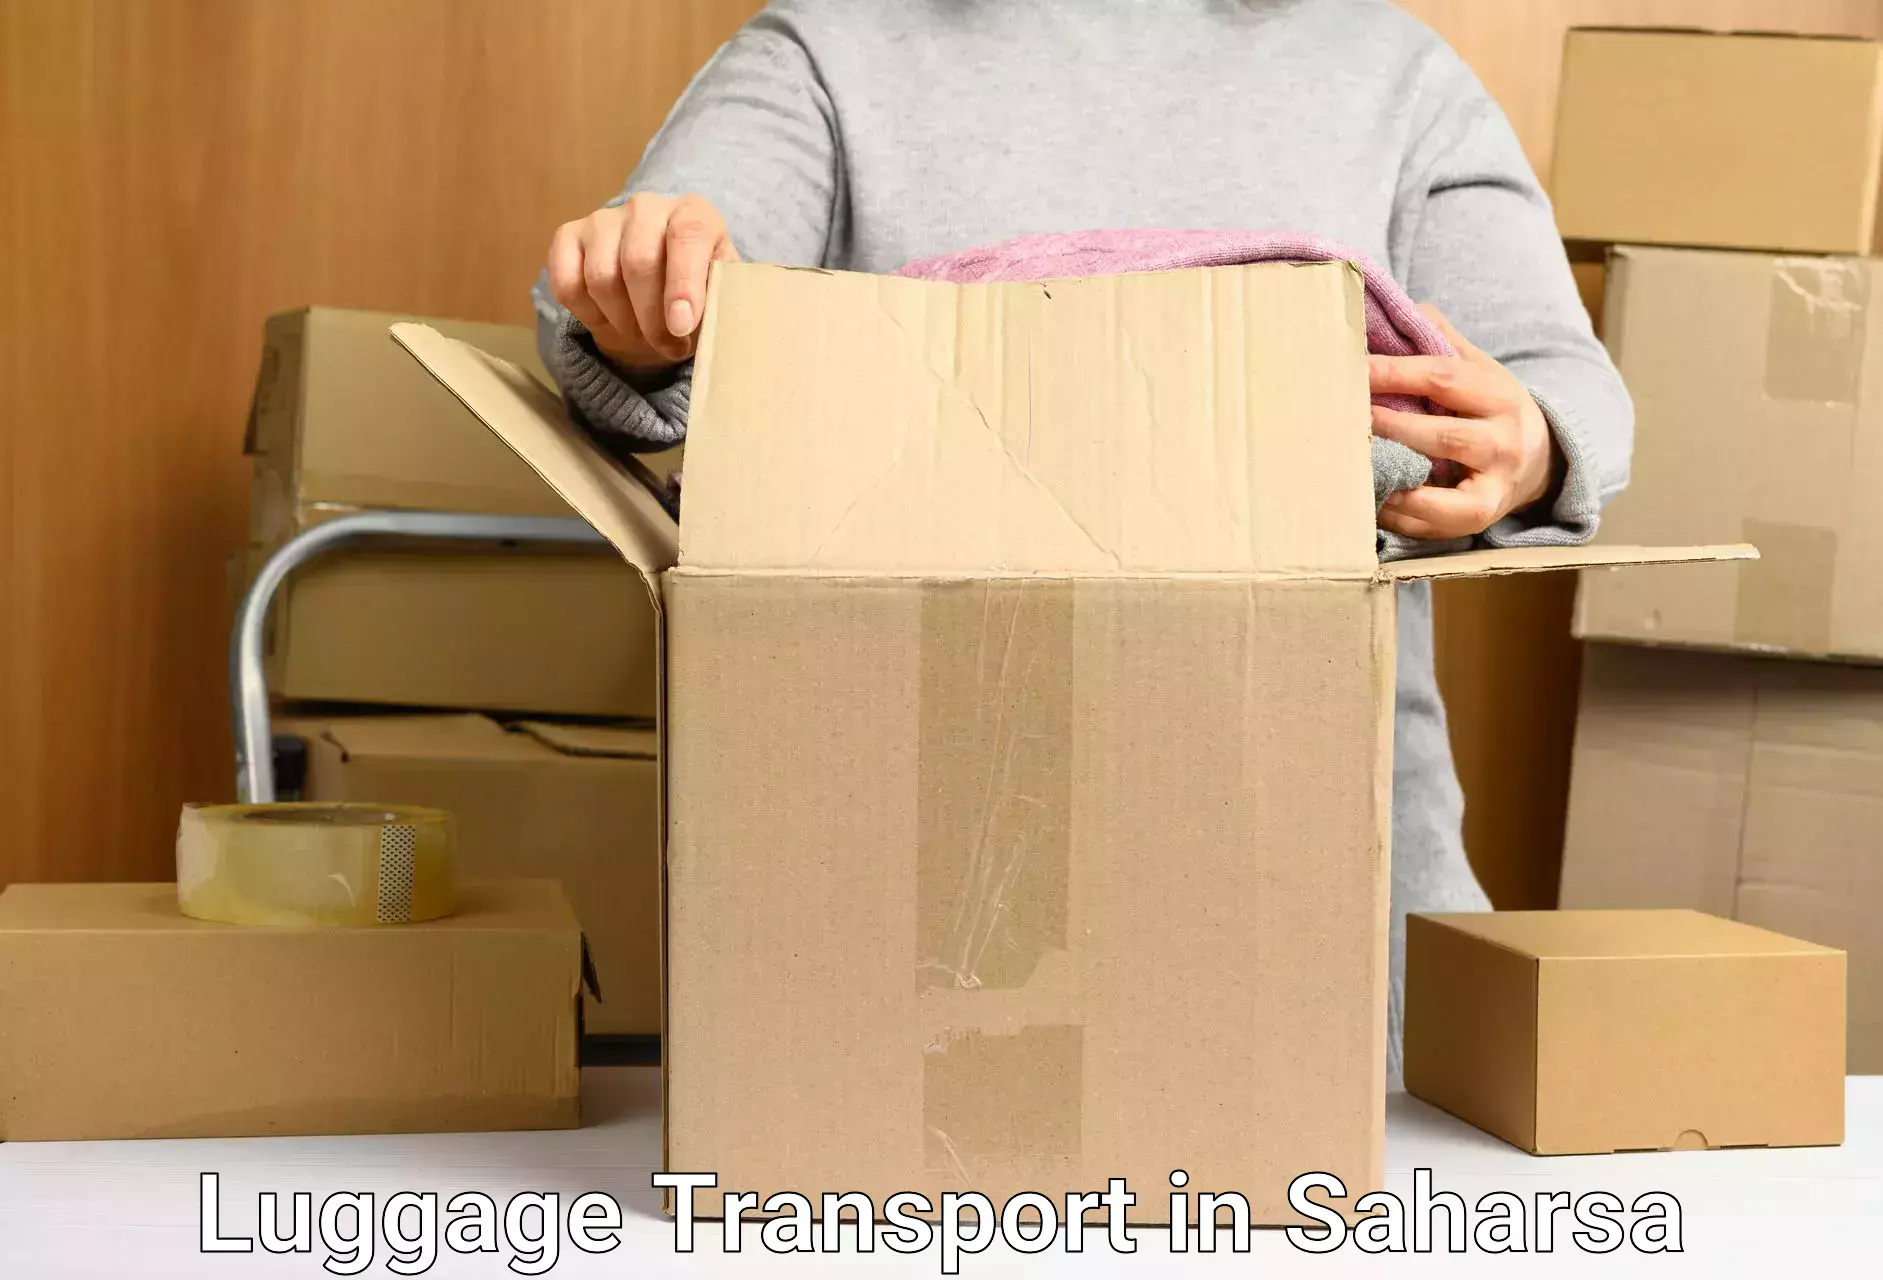 Baggage delivery scheduling in Saharsa